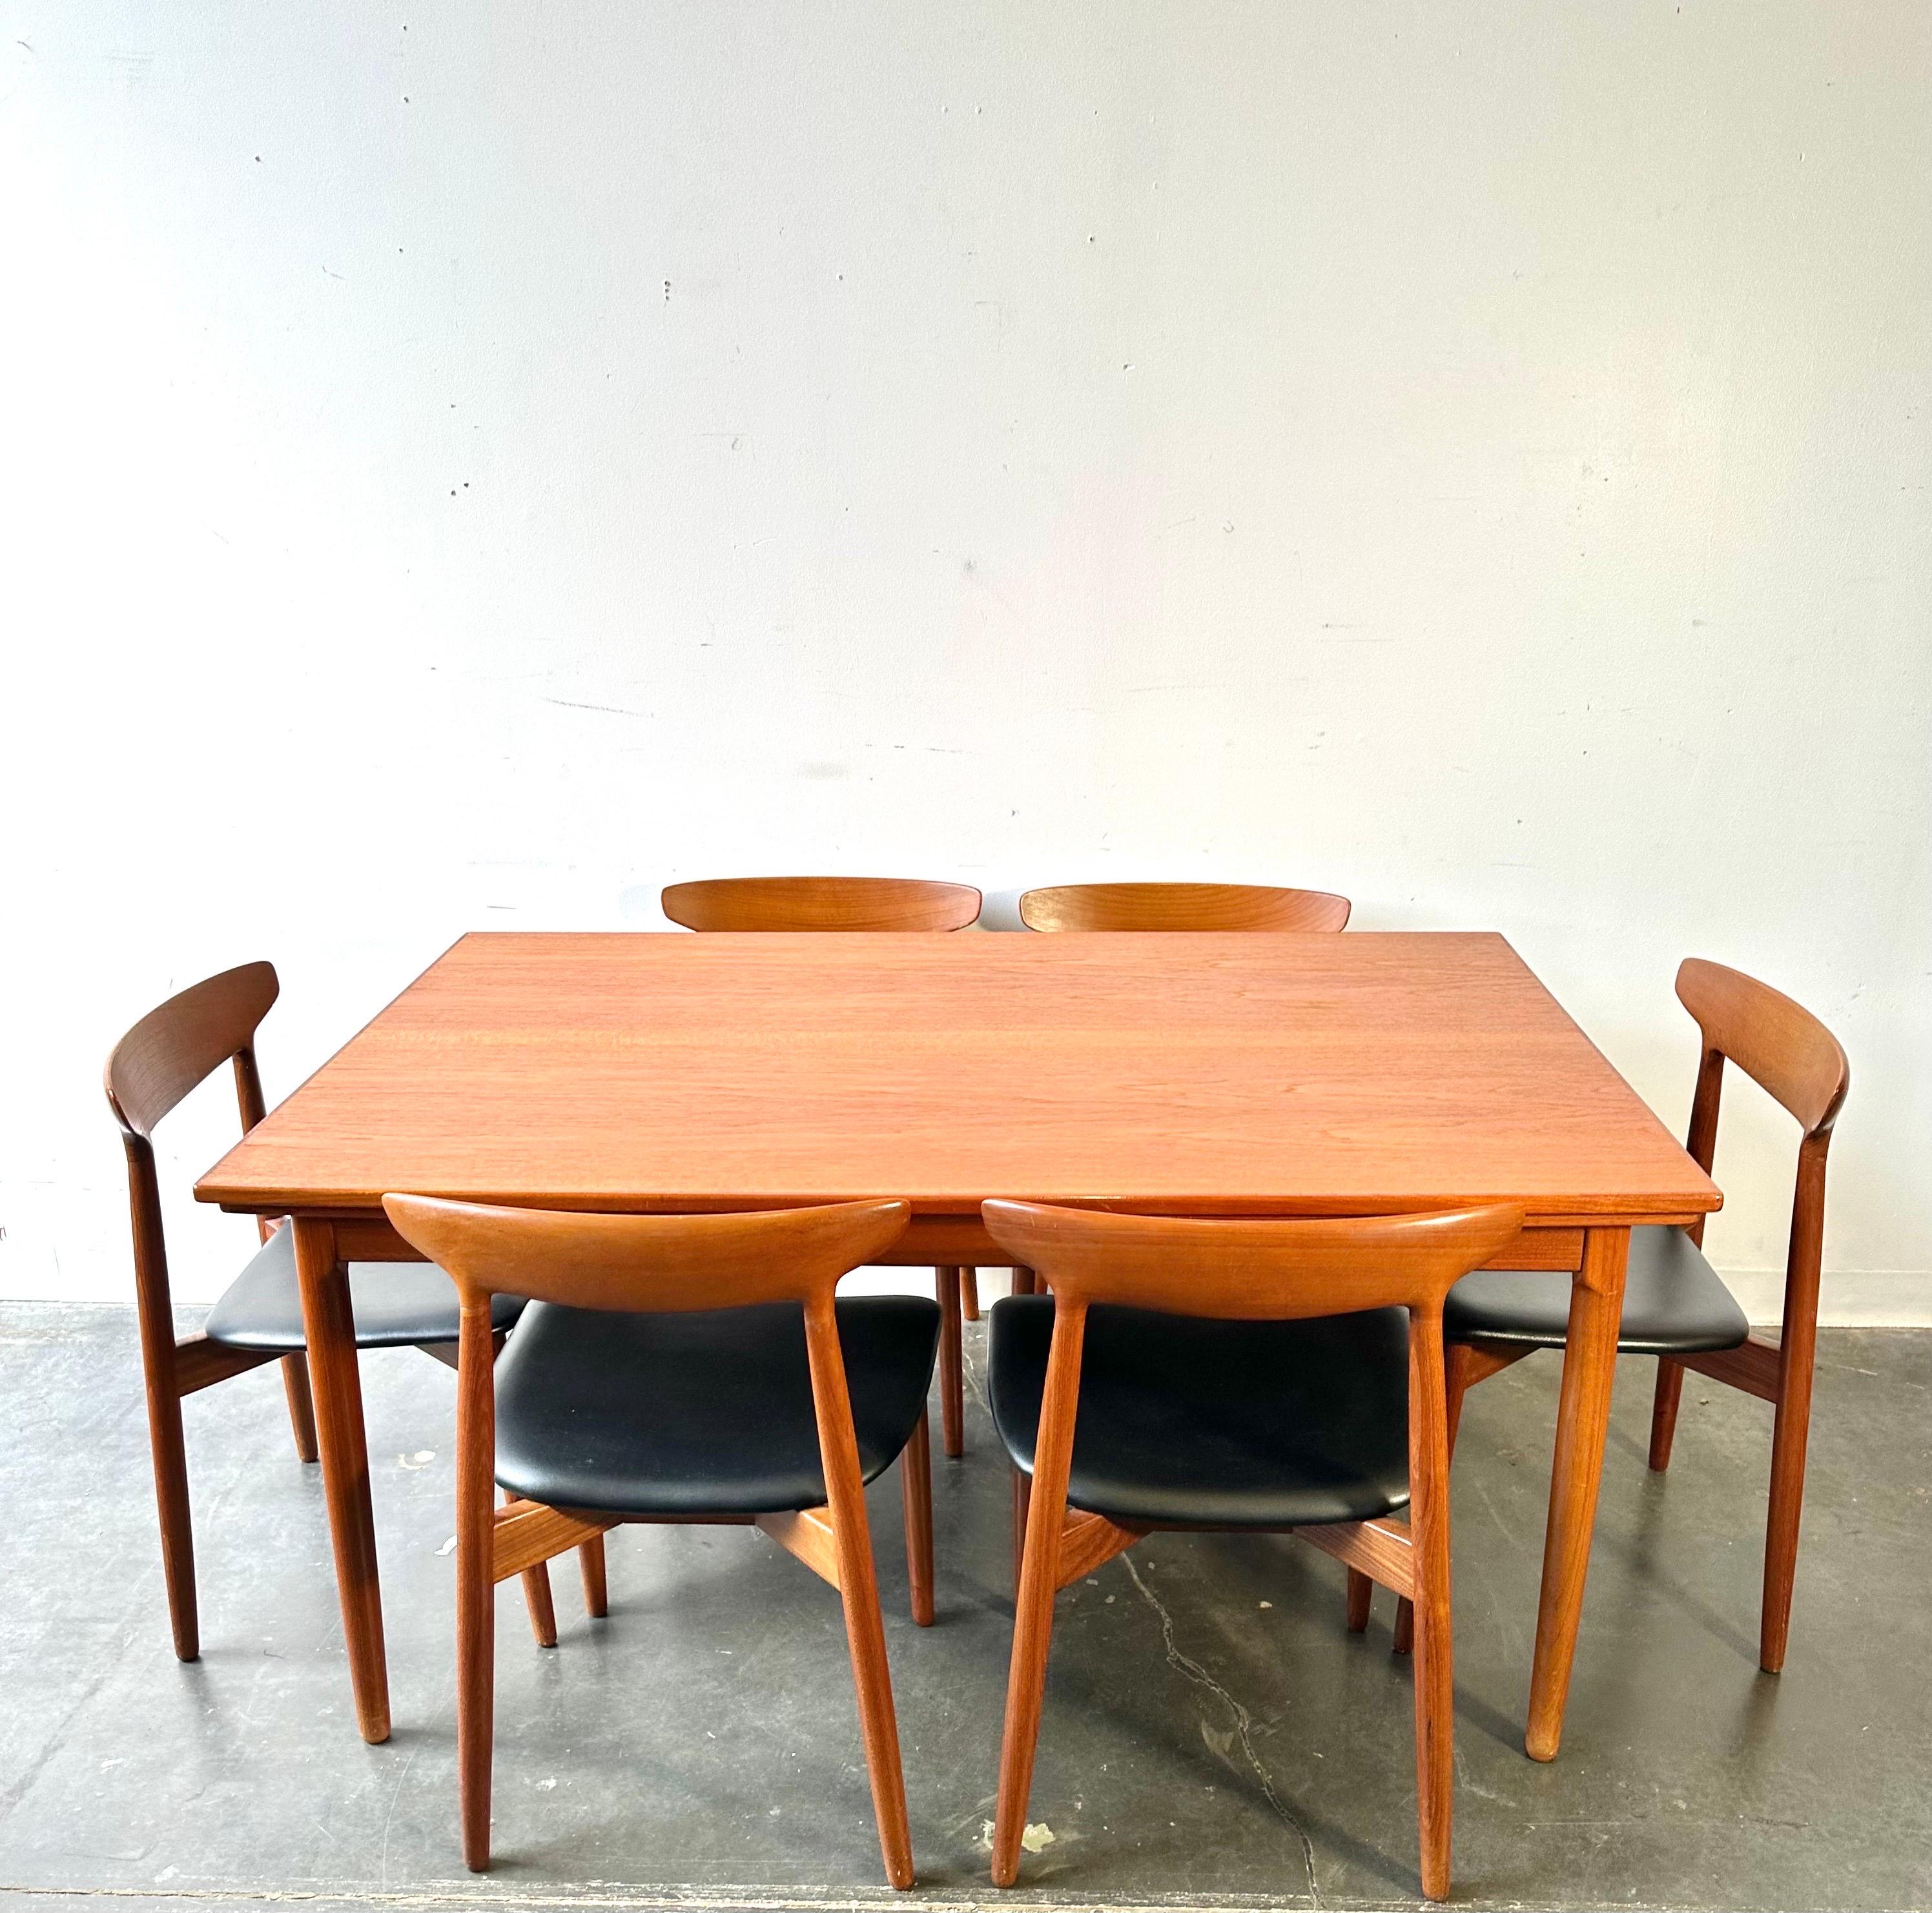 Danish teak dining table and chairs by Harry Ostergaard for Randers Mobelfabrik

Fantastic Scandinavian expandable table with six chairs.
This set is in great condition with very minor wear,

Measures: 57 1/2” W
35 3/4” D
28 1/2” H

21” x 2